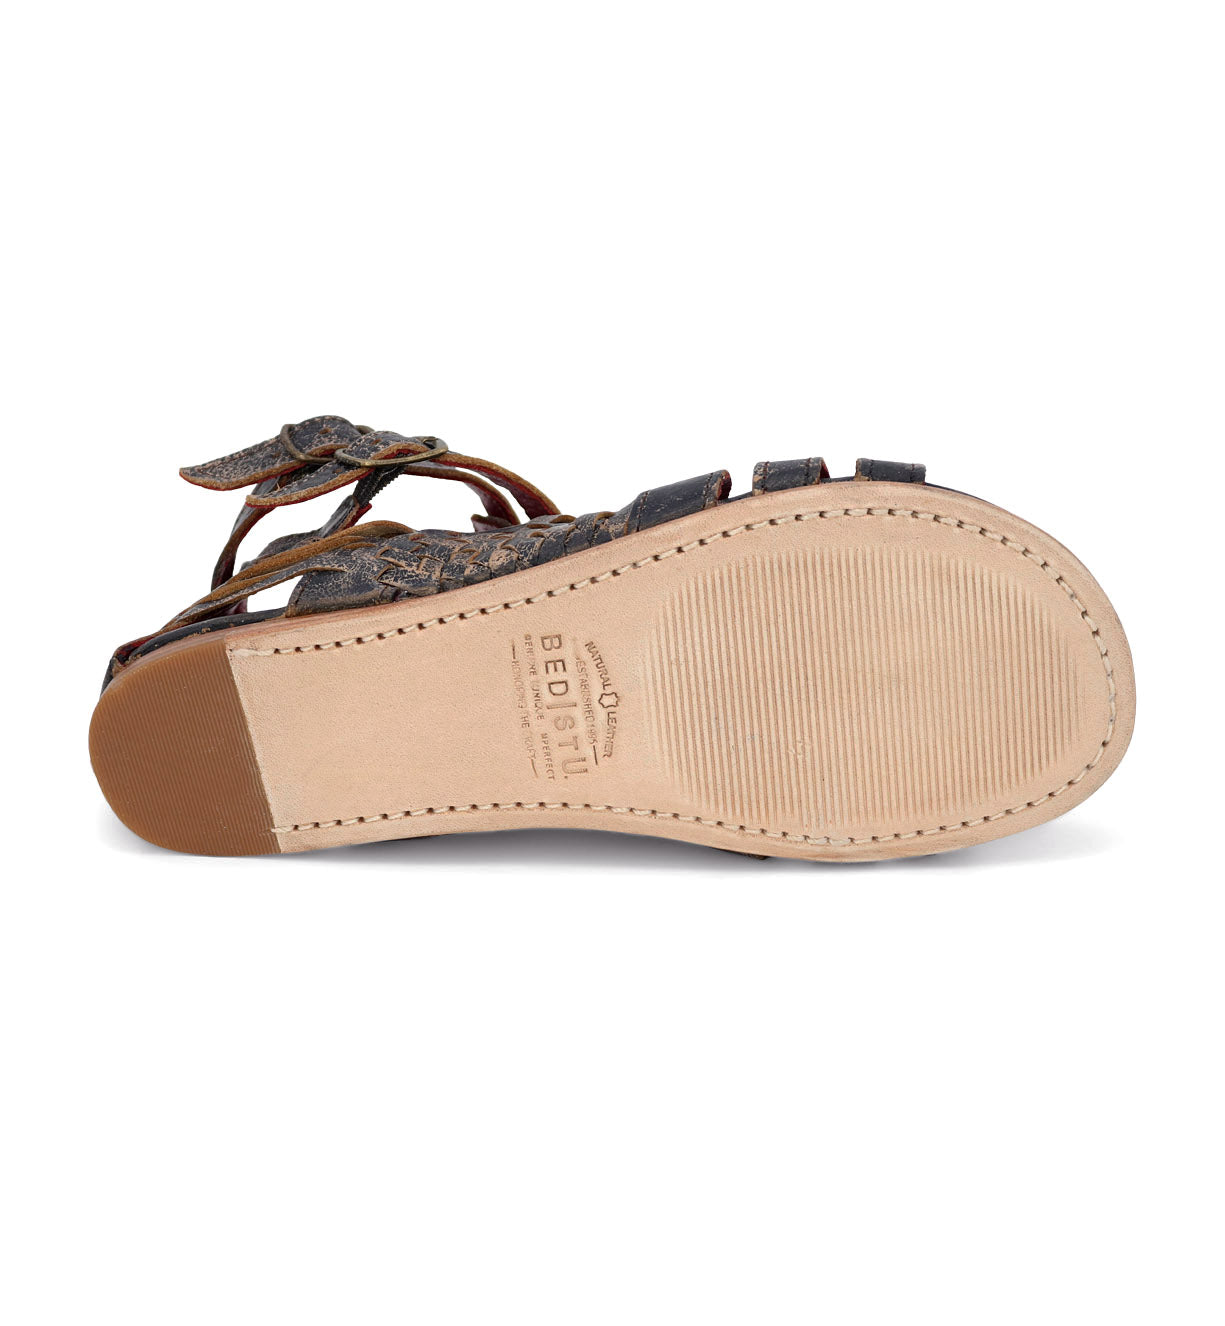 A pair of Claire women's sandals with straps and buckles by Bed Stu.